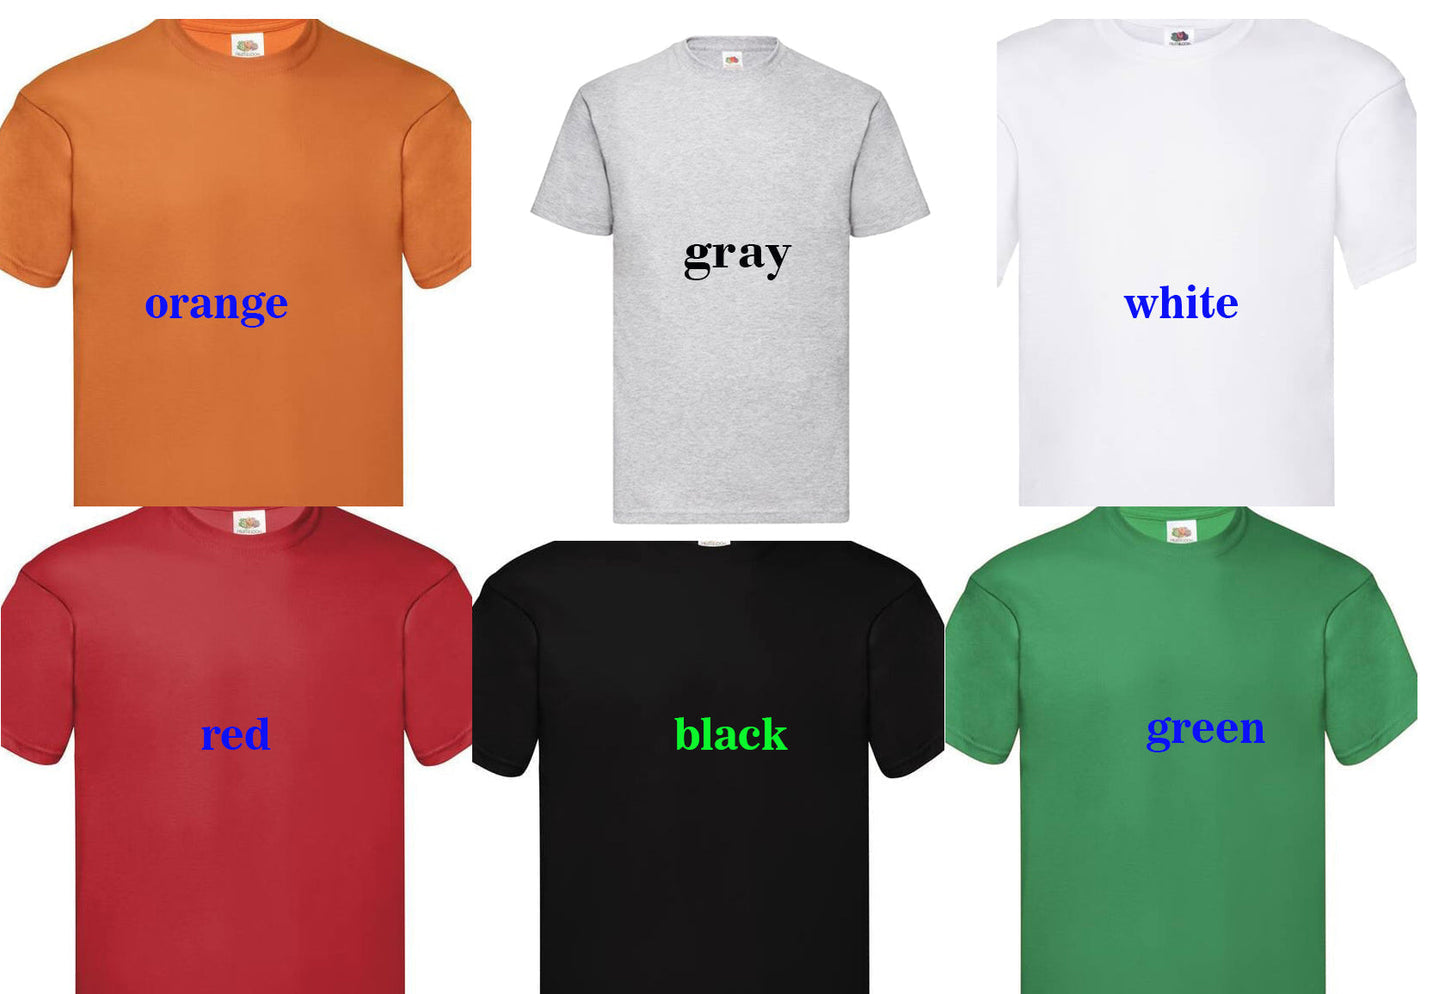 094. CRAZY FACE, Personalized T-Shirt, Custom Text, Make Your Own Shirt, Custom Tee